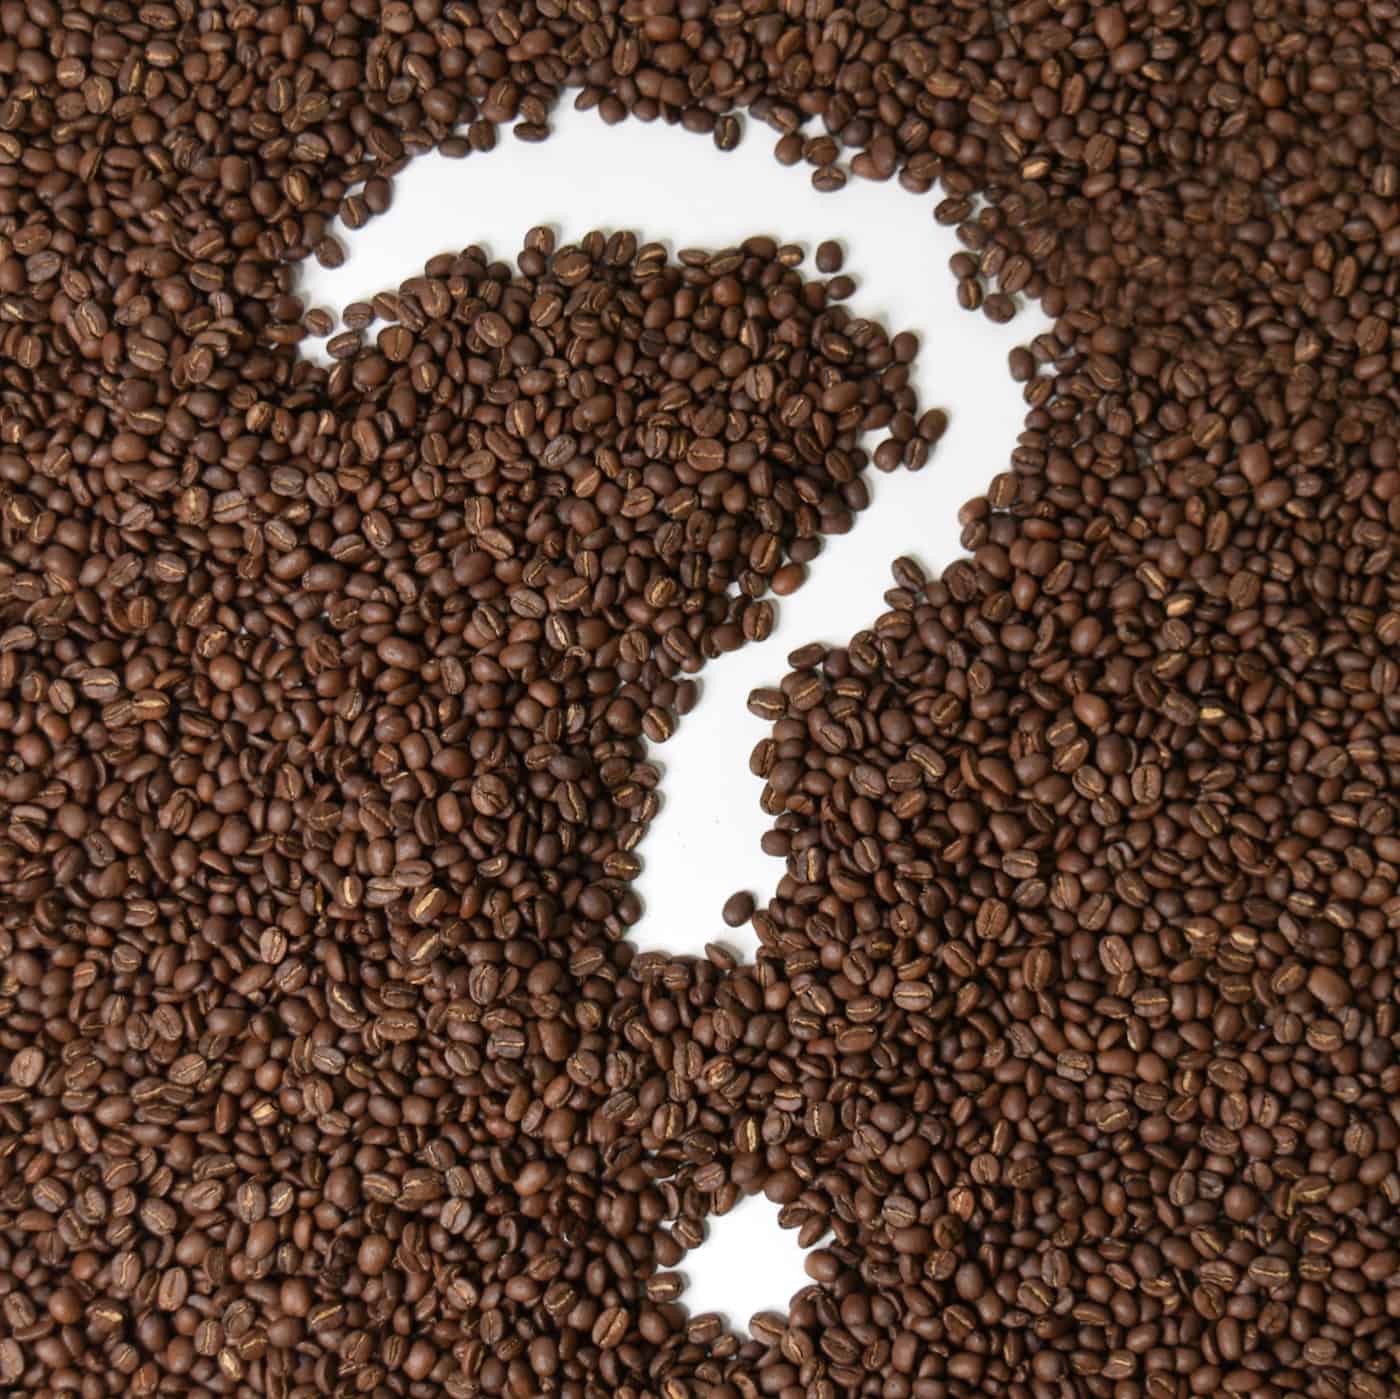 Question mark inside of coffee beans